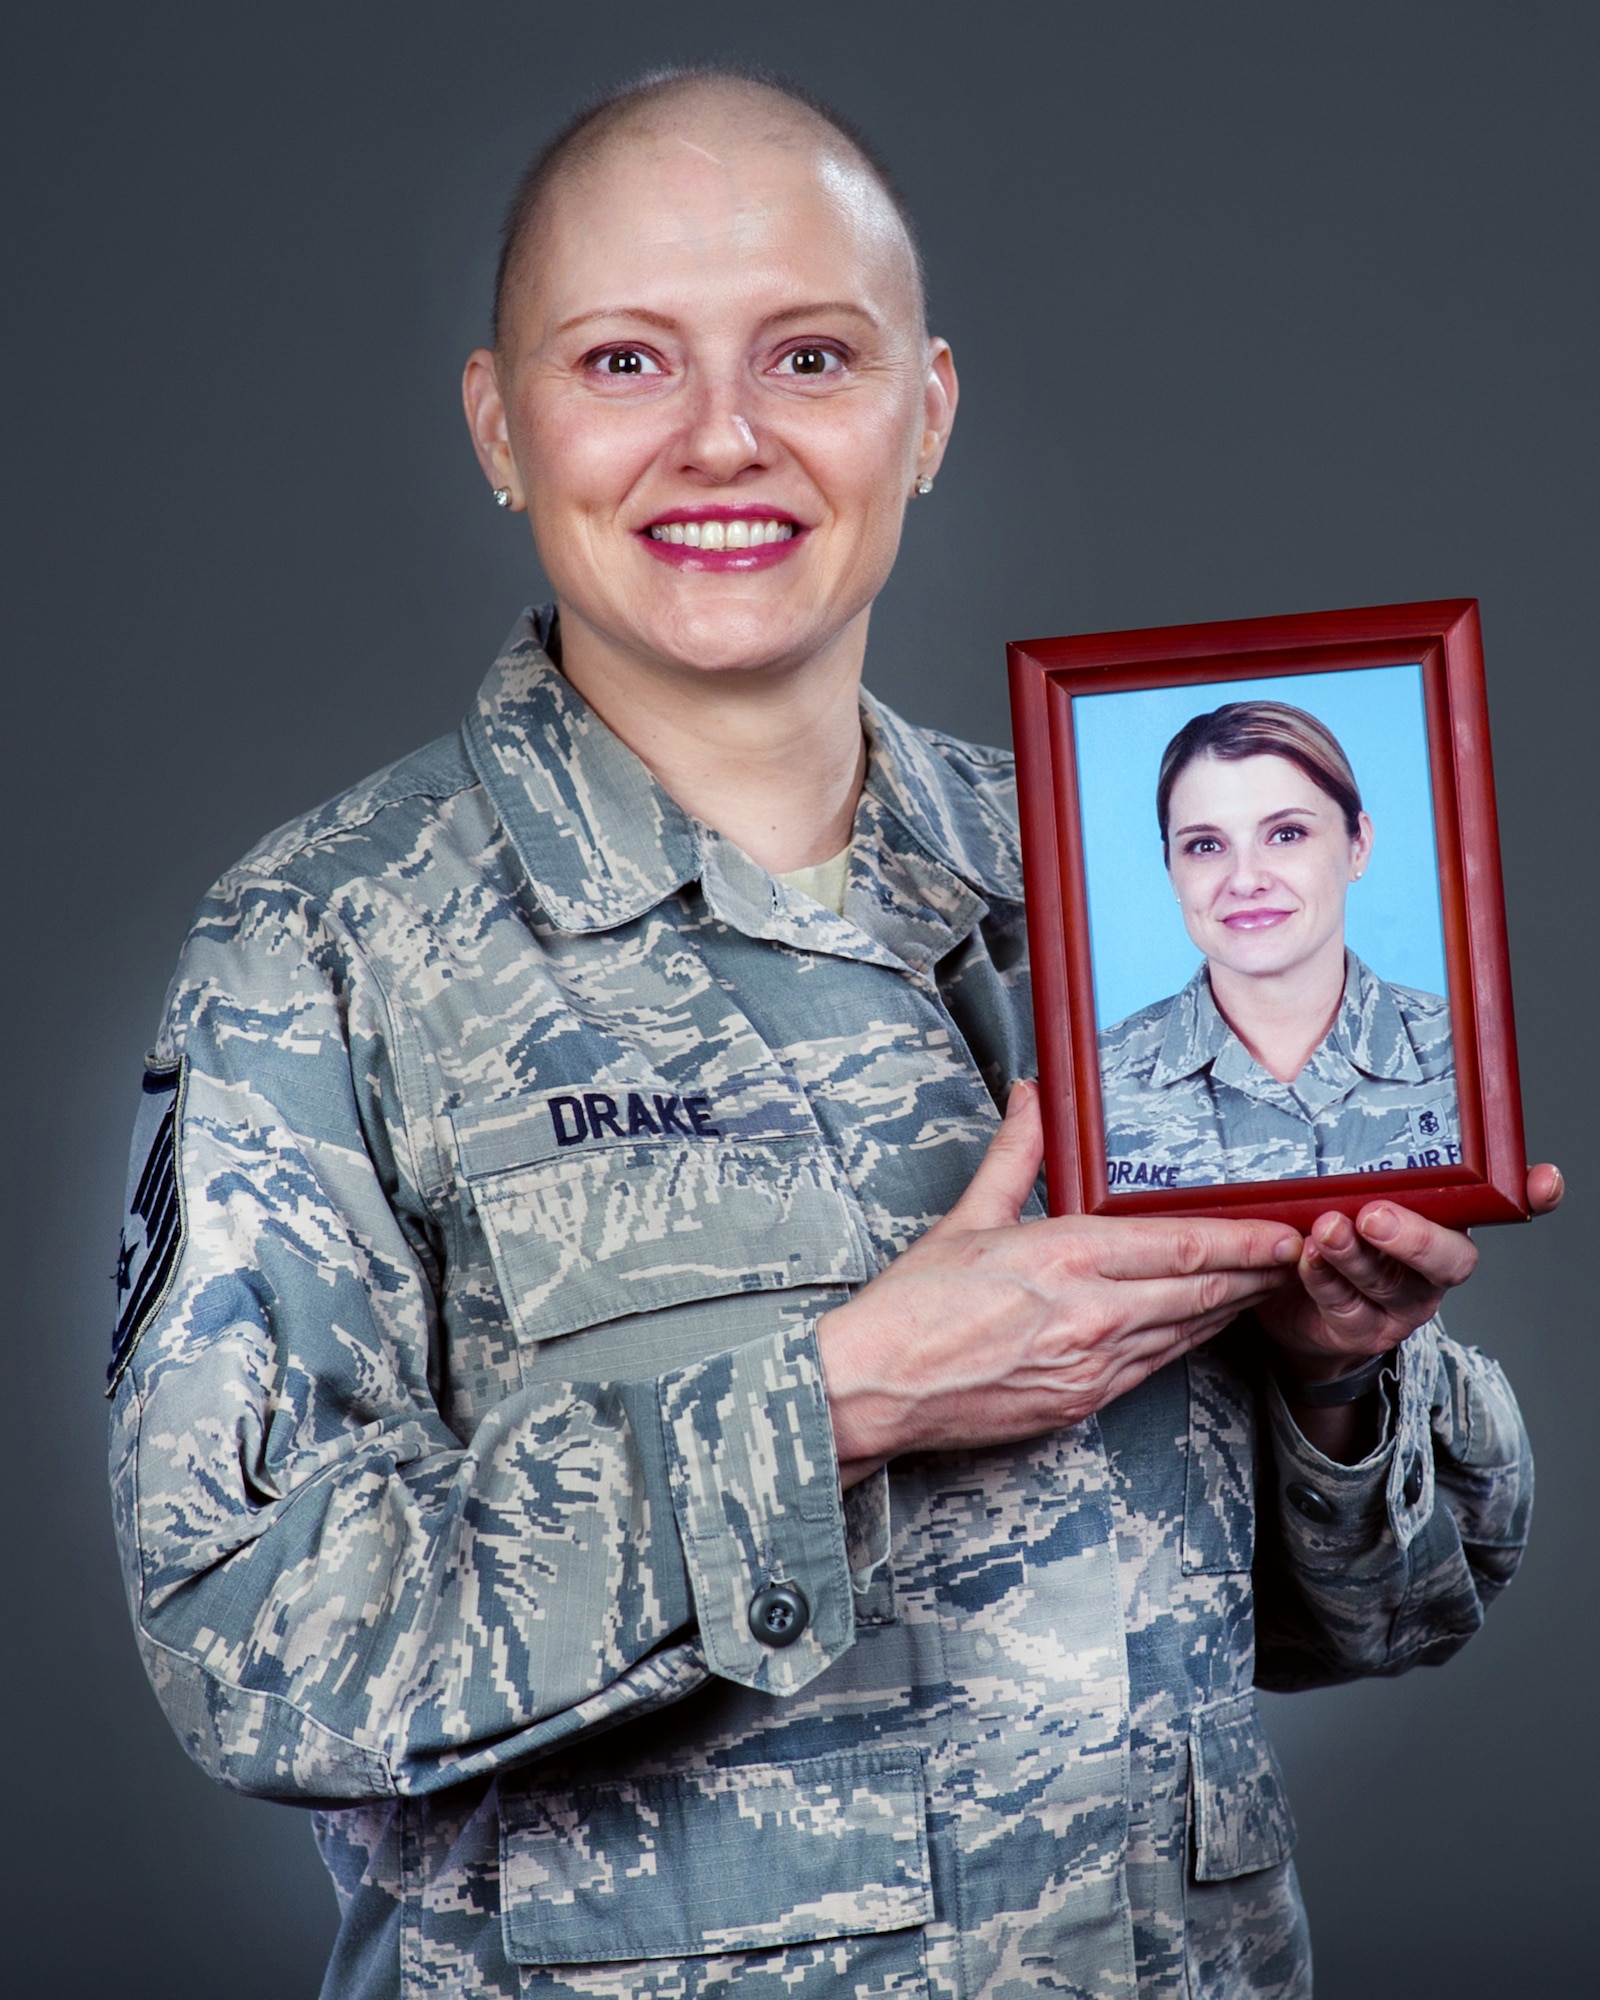 U.S. Air Force Master Sgt. Tracey Drake, 60th Medical Operations Squadron poses with a picture of herself prior to losing her hair from chemotherapy treatment, Travis Air Force Base, Calif., Dec. 15, 2016. Drake was diagnosed with metastatic breast cancer during her retirement physical in July 2016, 3 weeks before starting terminal leave. Drake faces more chemotherapy, surgery, radiation, targeted infusion, and reconstruction surgery. (U.S. Air Force photo/Louis Briscese)